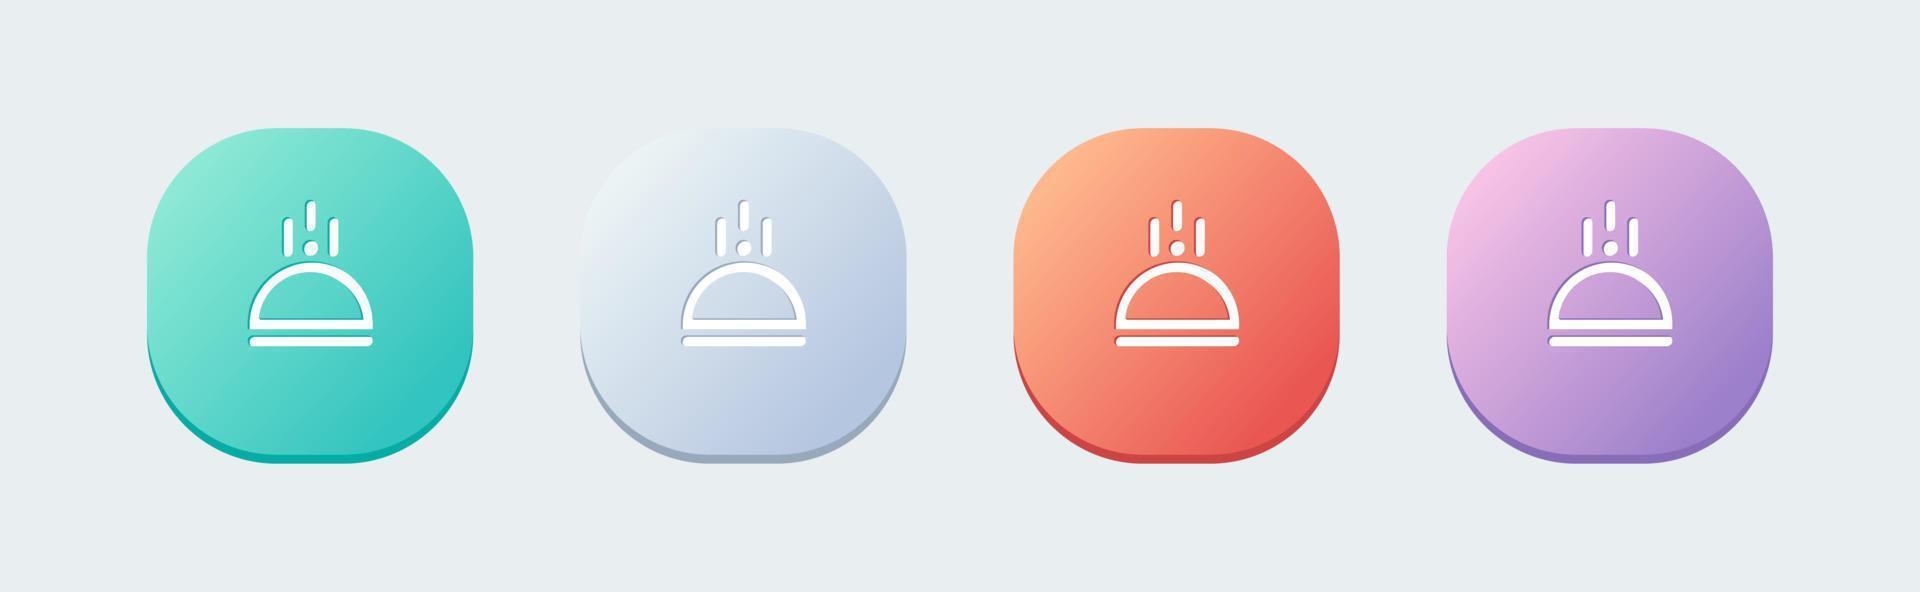 Food tray line icon in flat design style. Dinner signs vector illustration.